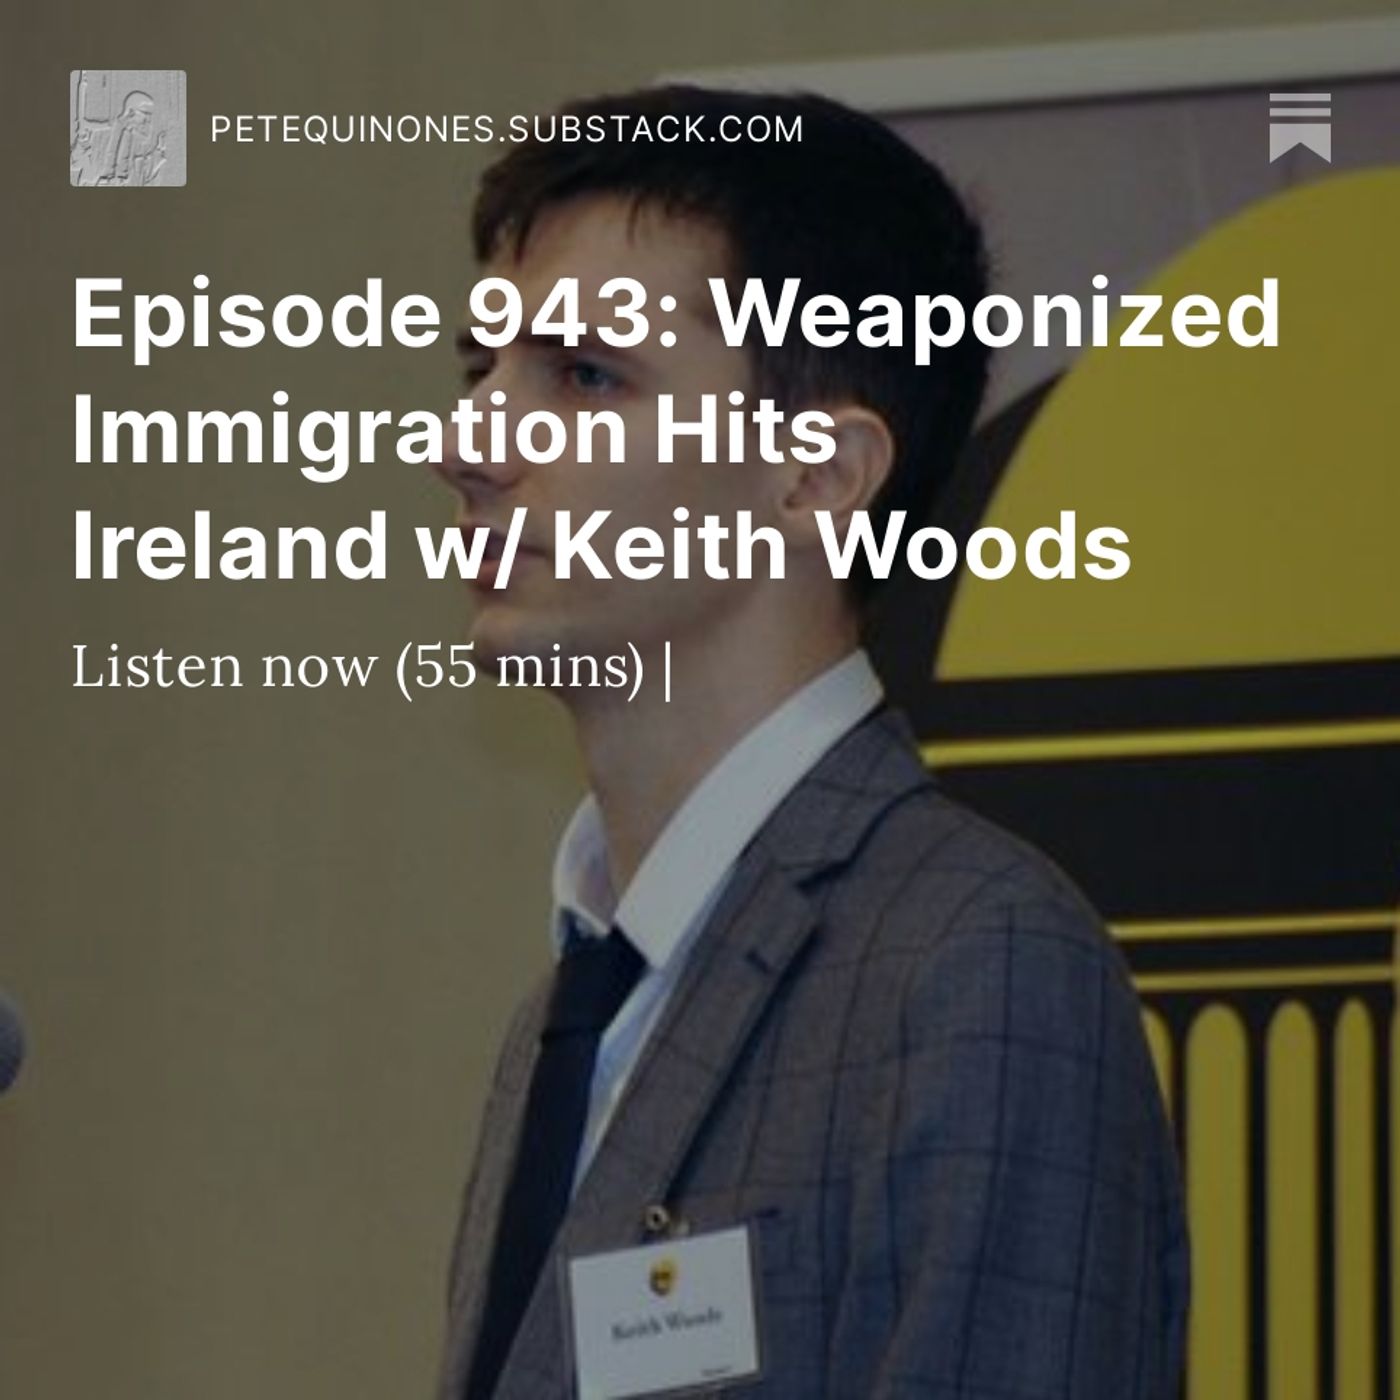 Episode 943: Weaponized Immigration Hits Ireland w/ Keith Woods